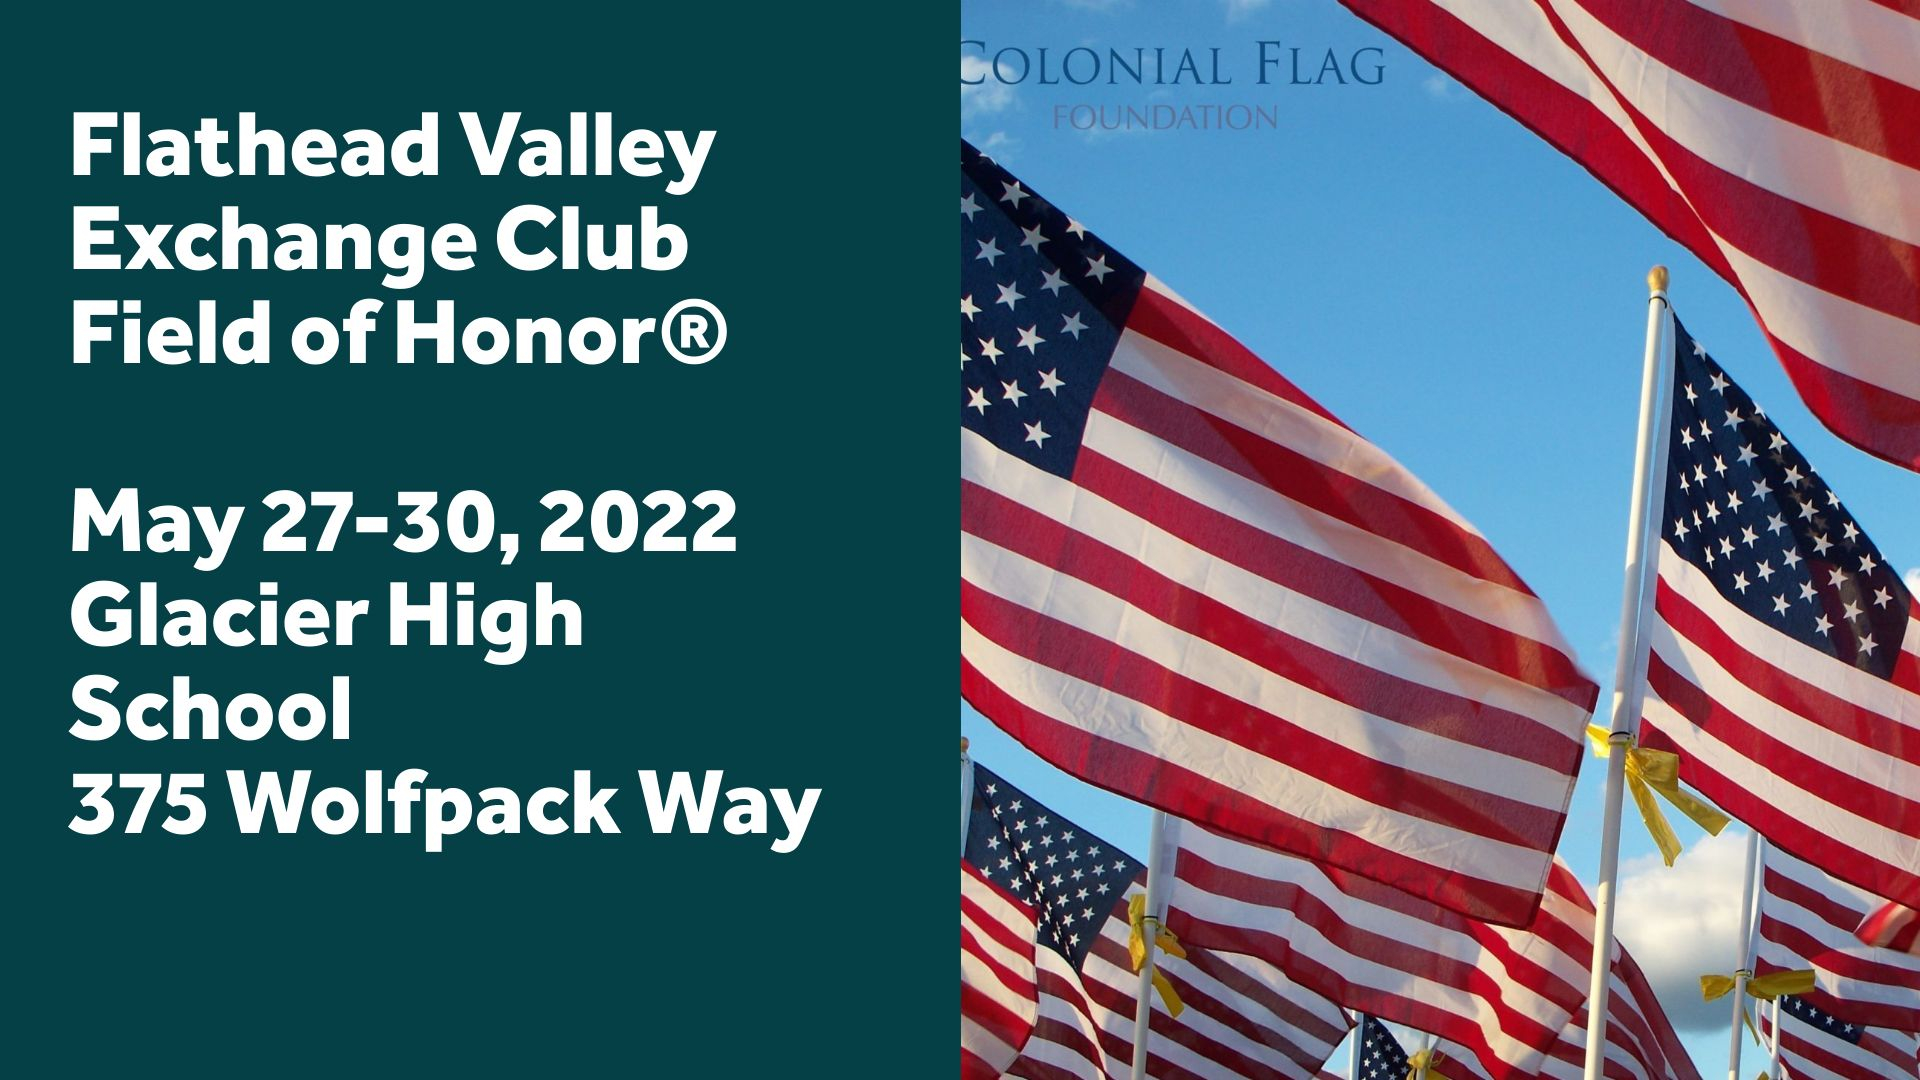 Flathead Valley Exchange Club and the 2022 Field of Honor® cover page